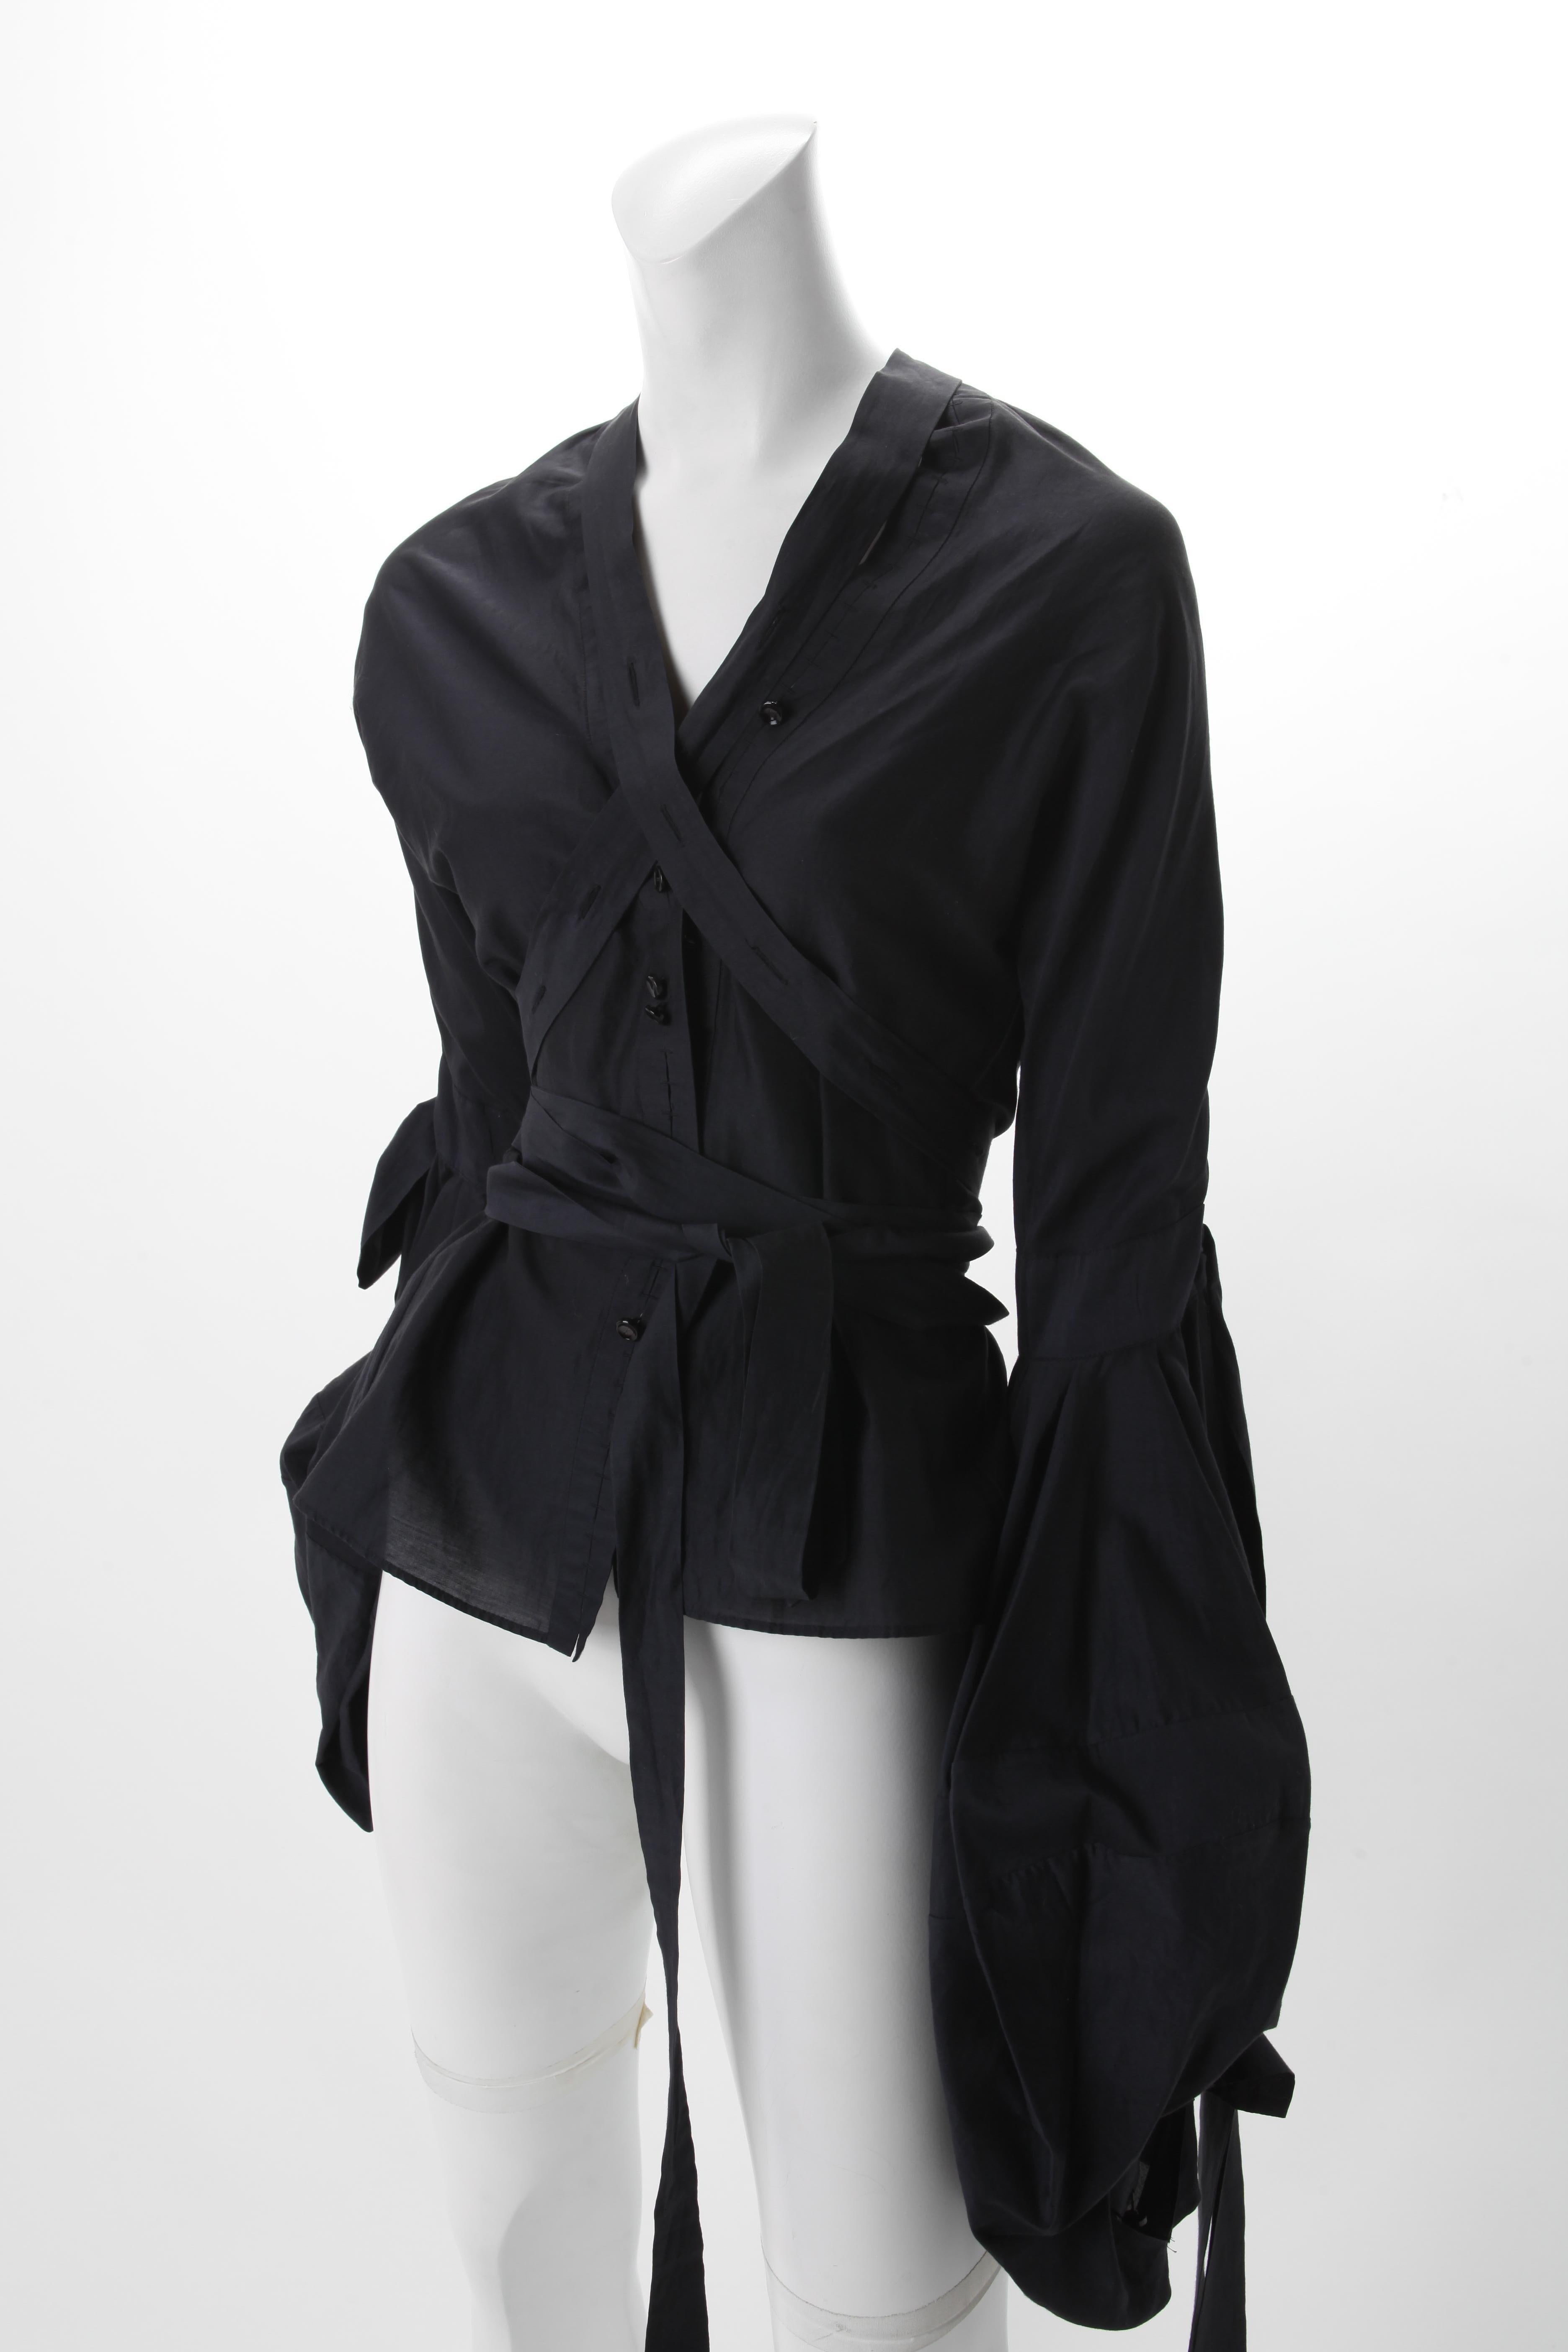 2002 Tom Ford for Yves Saint Laurent Black Cotton Peasant Blouse F38
Lightweight black Cotton and Silk Blouse with Elongated Ties; Bishop Sleeves.